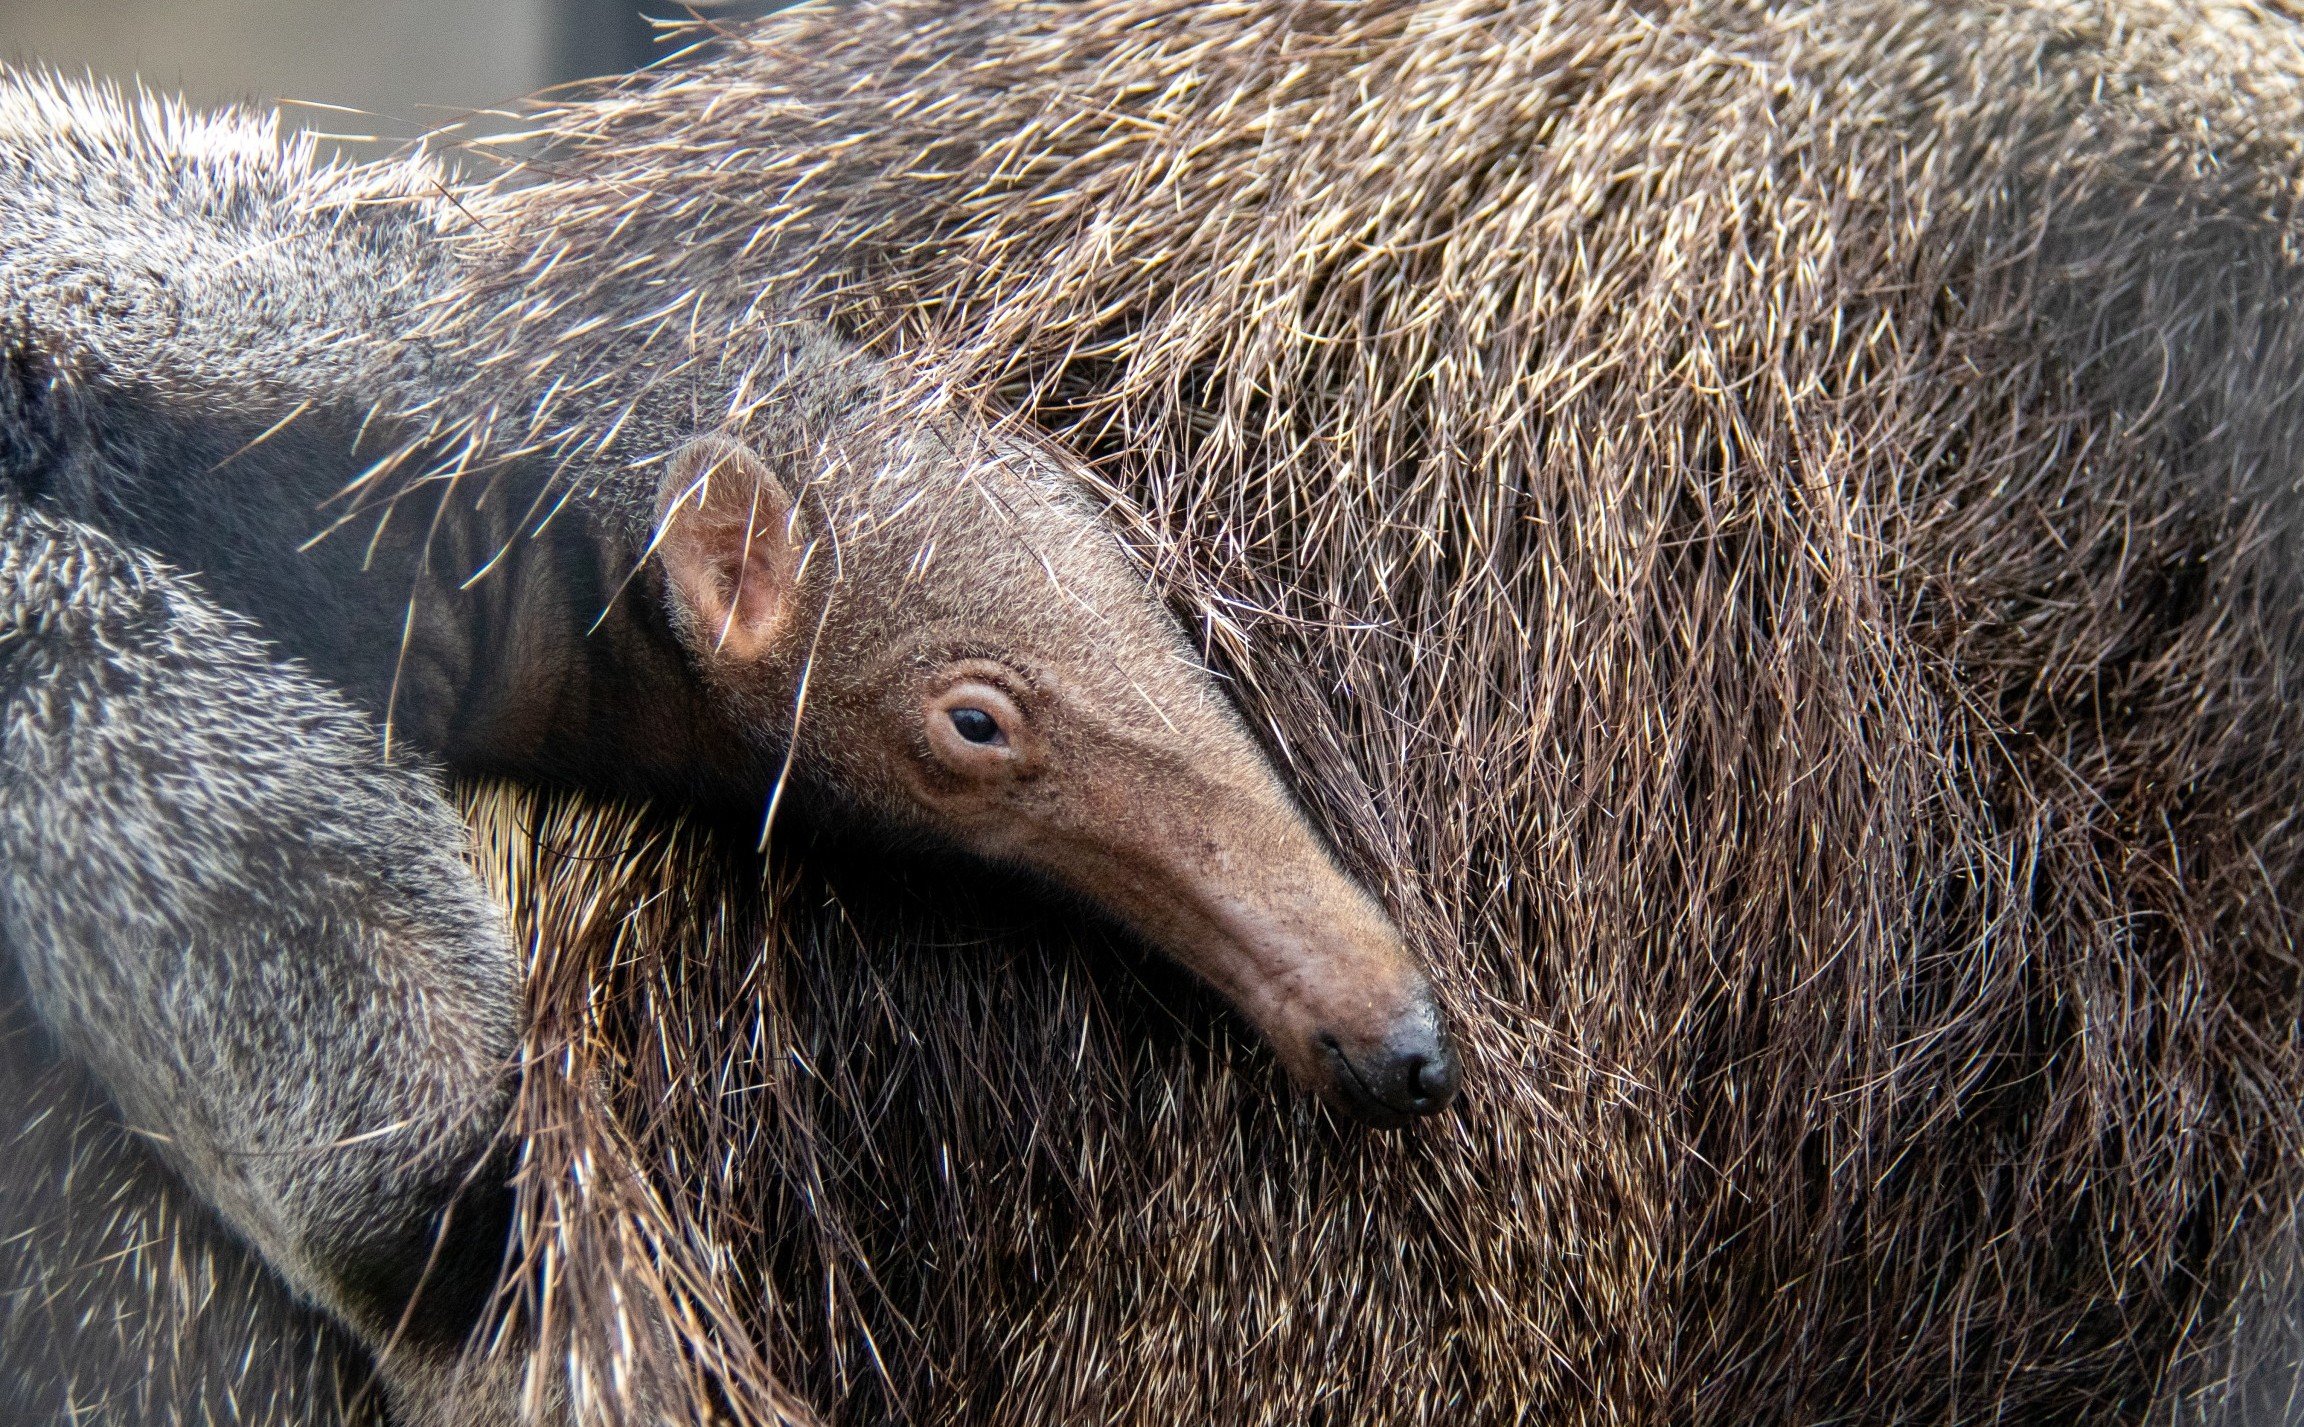 Baby anteater born at Lincoln Children's Zoo